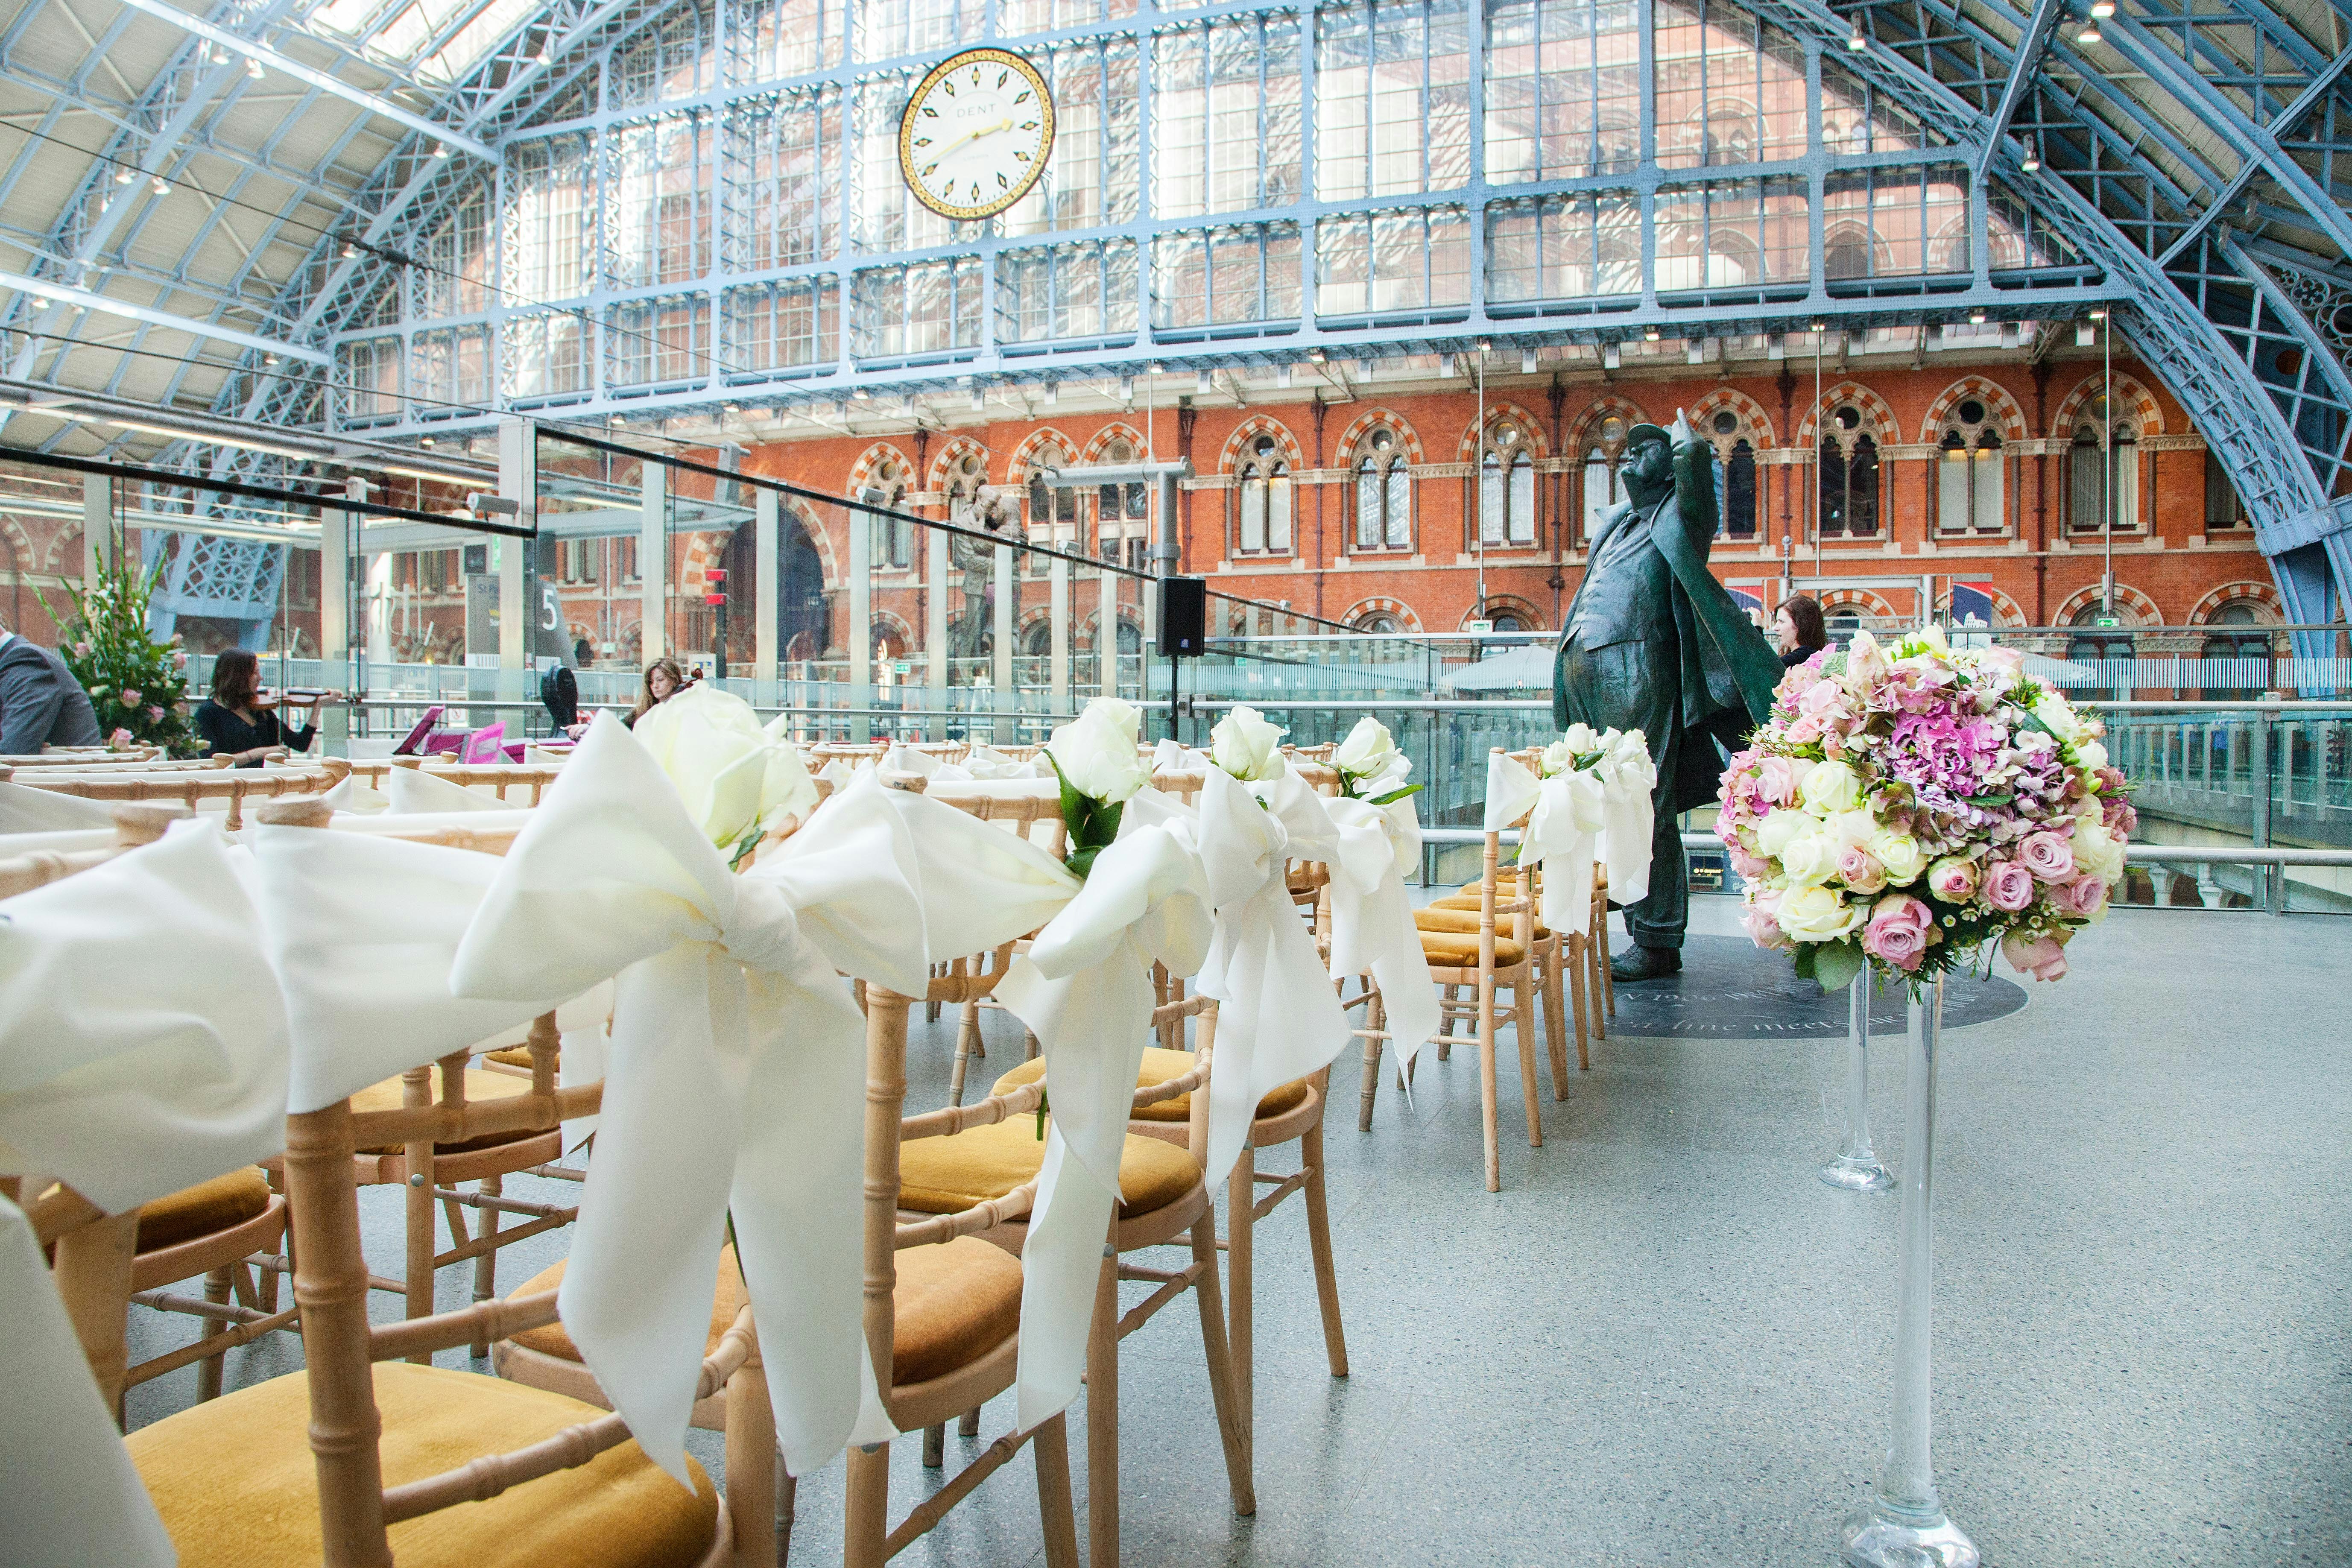 St Pancras Brasserie and Champagne Bar by Searcys  - Weddings image 5